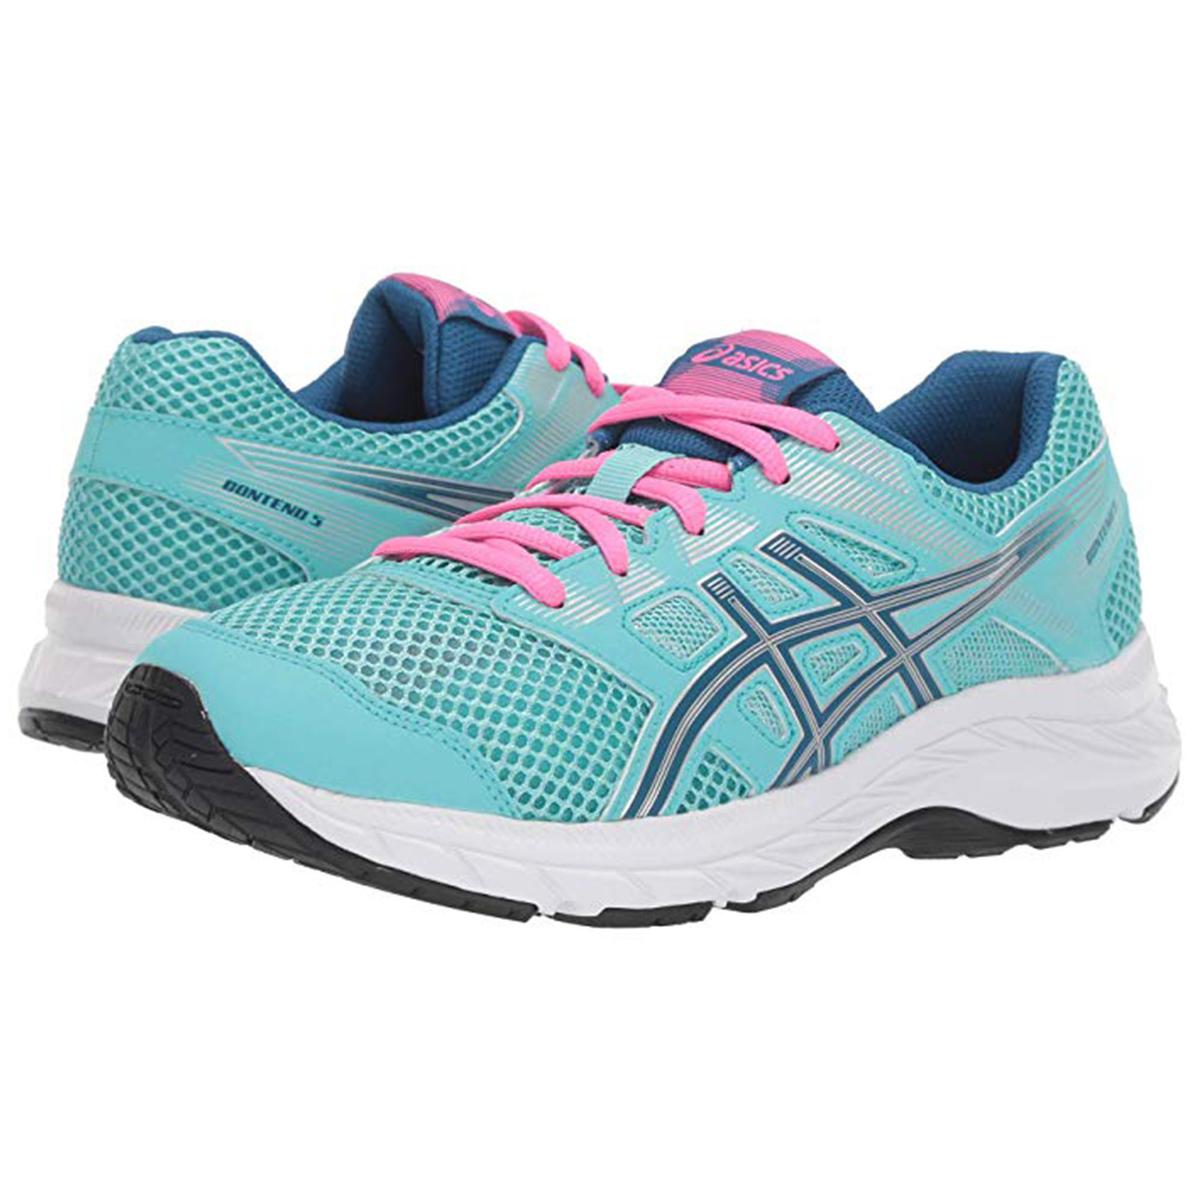 Asics Youth Girl's Gel-Contend 5 Running Shoes - Sun & Ski Sports